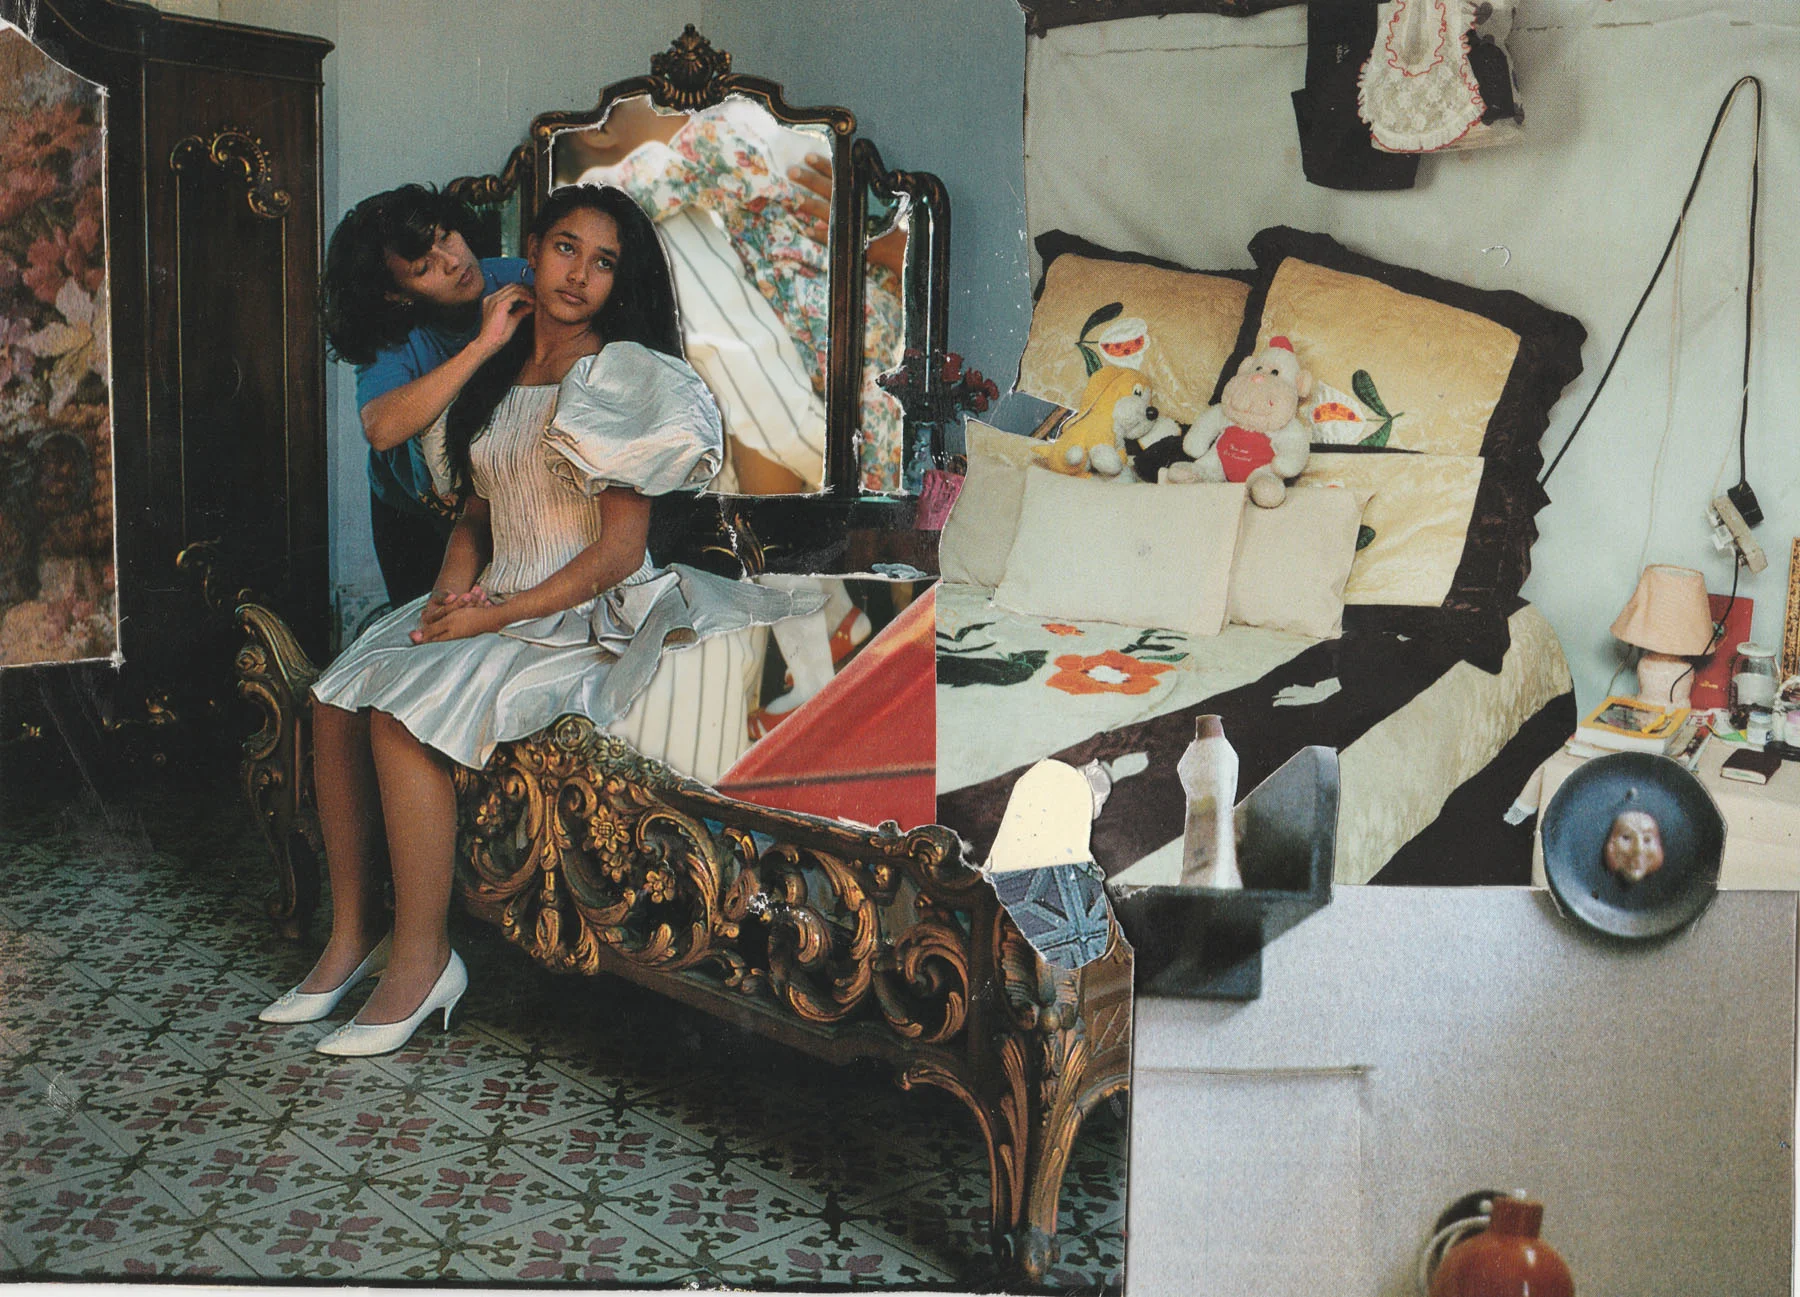 A photo collage showing a young woman sitting on the edge of a bed, as another woman plaits her hair.
